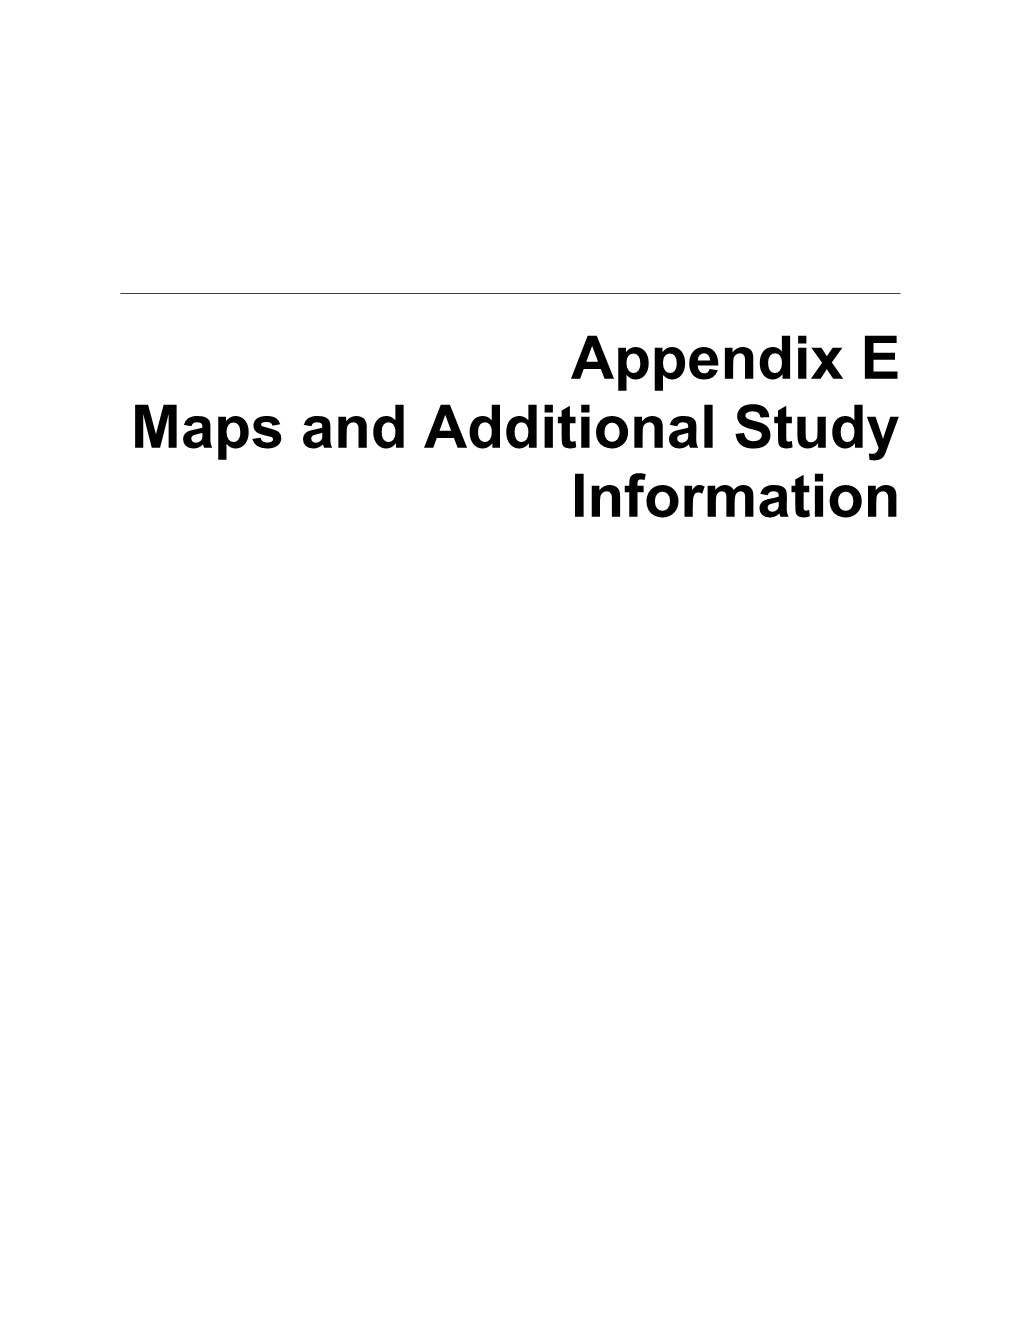 Maps and Additional Study